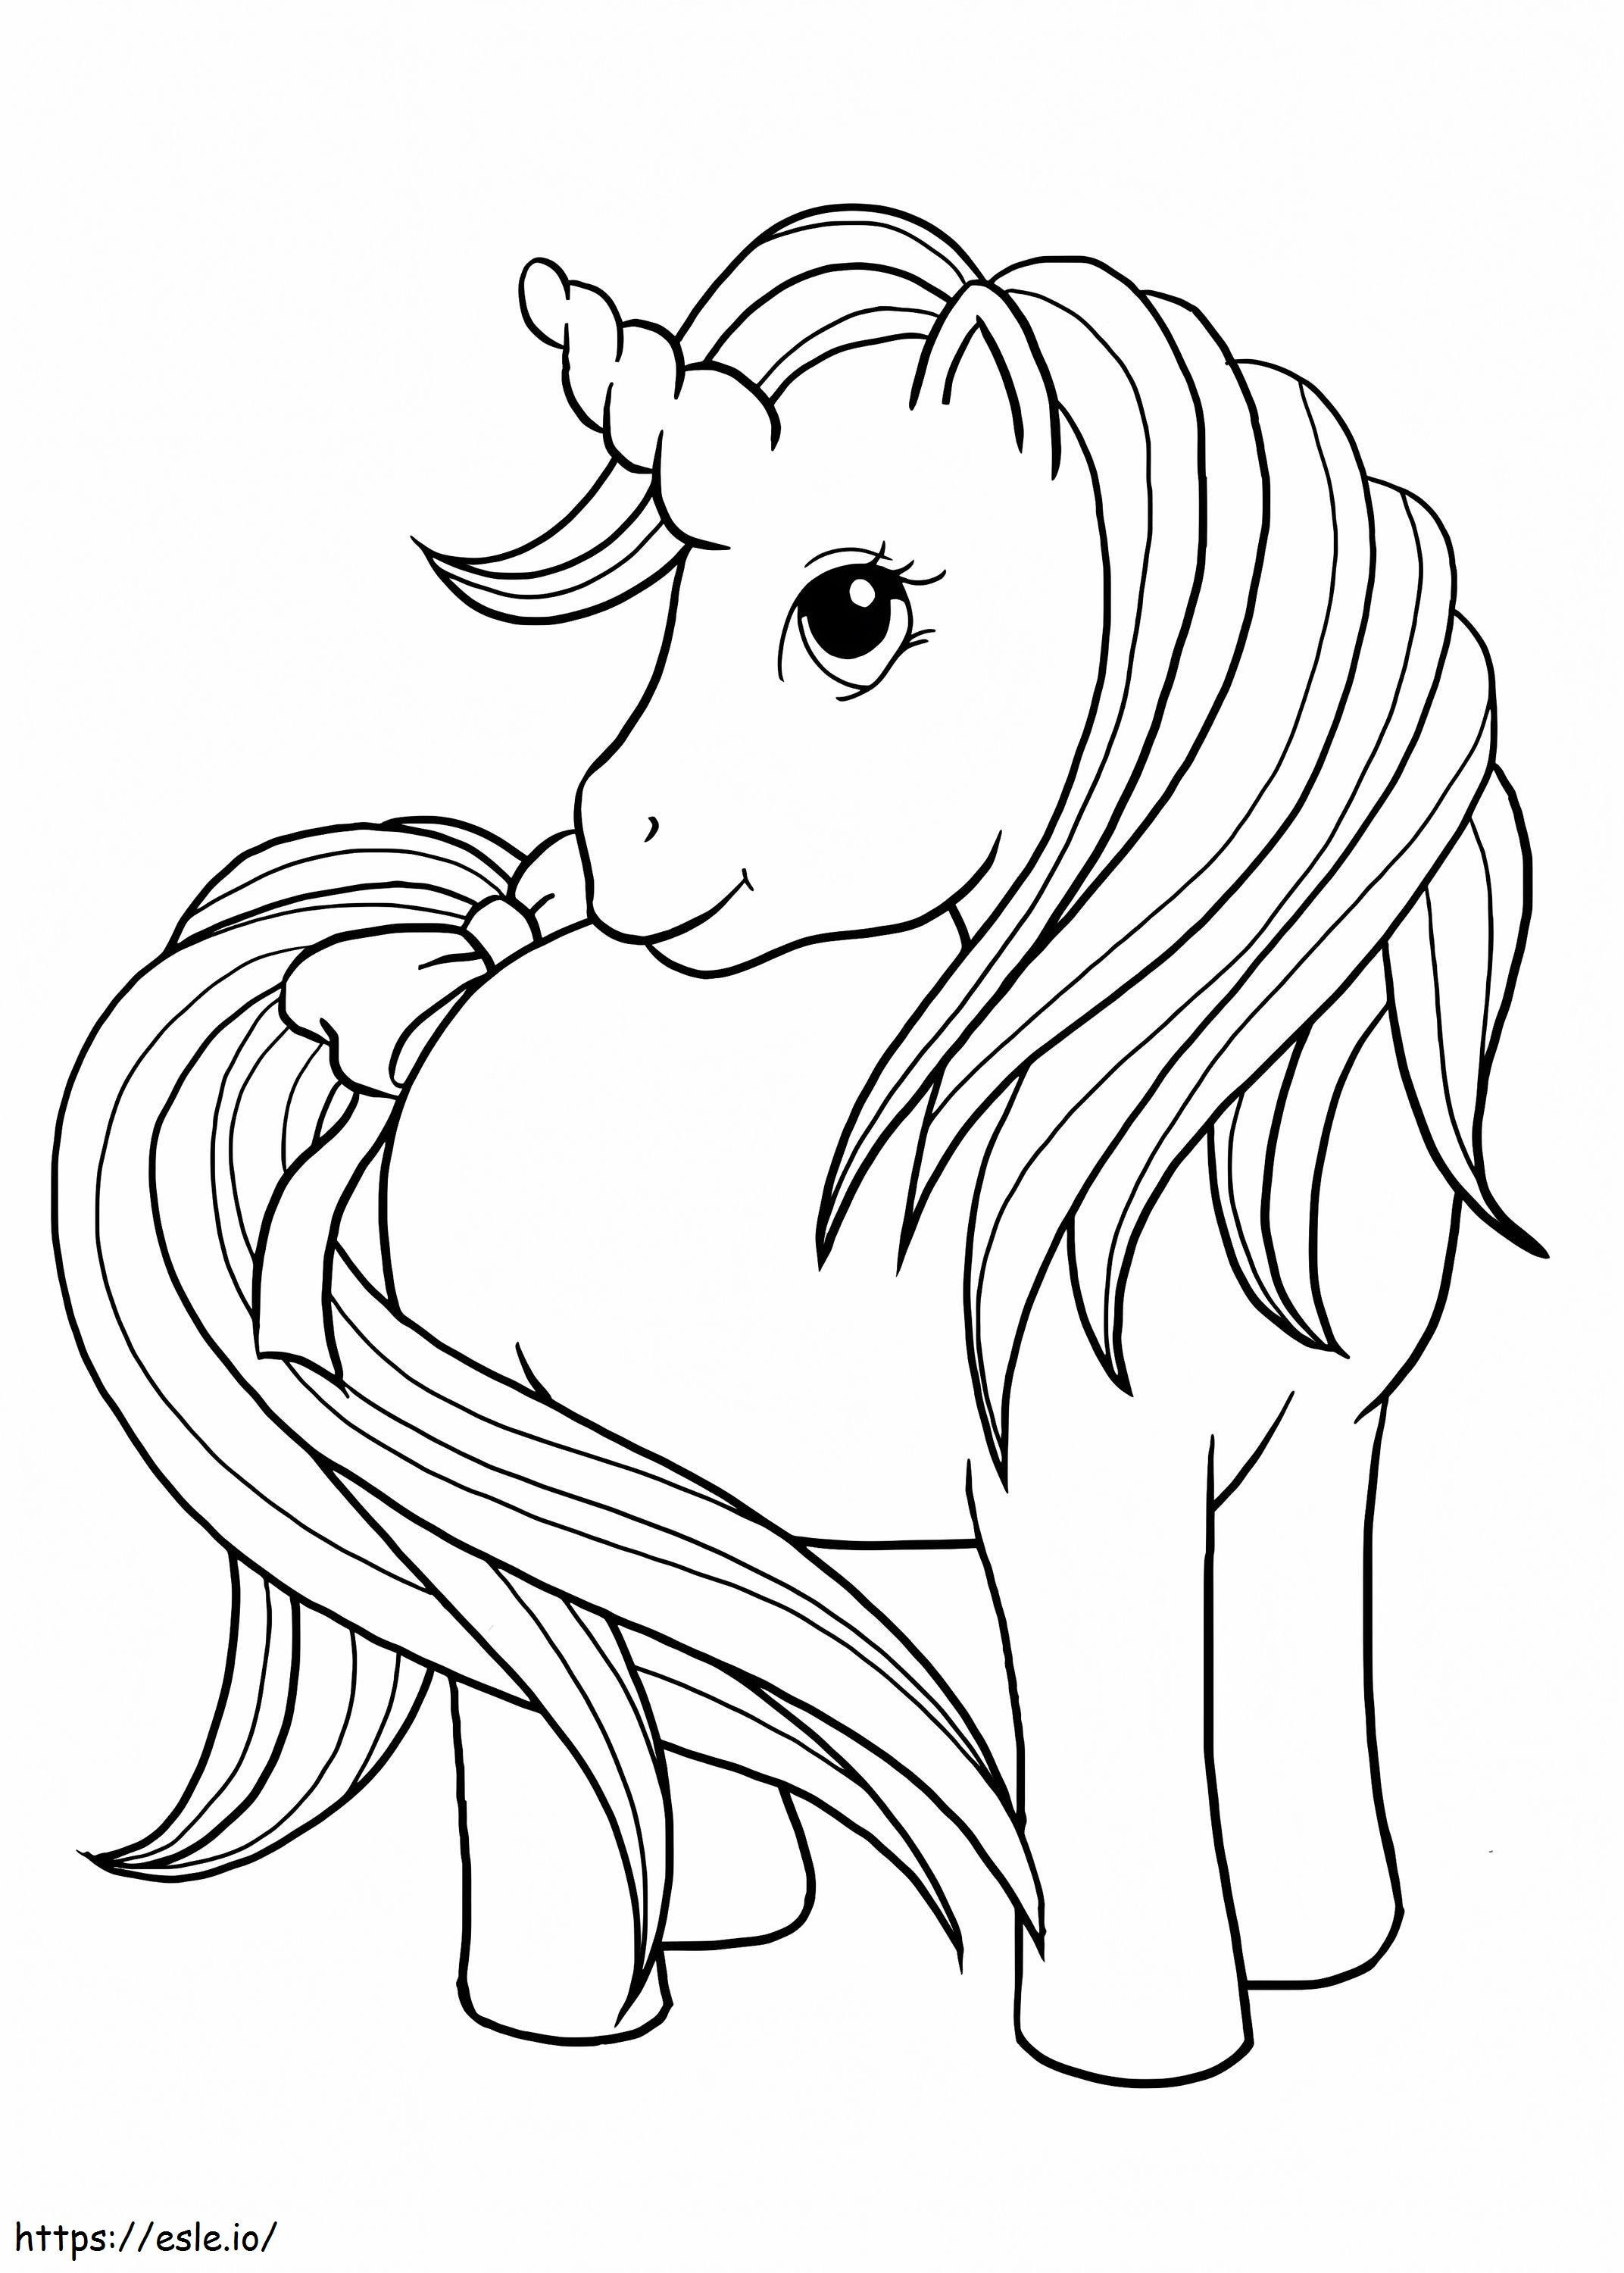 Adorable Unicorn coloring page